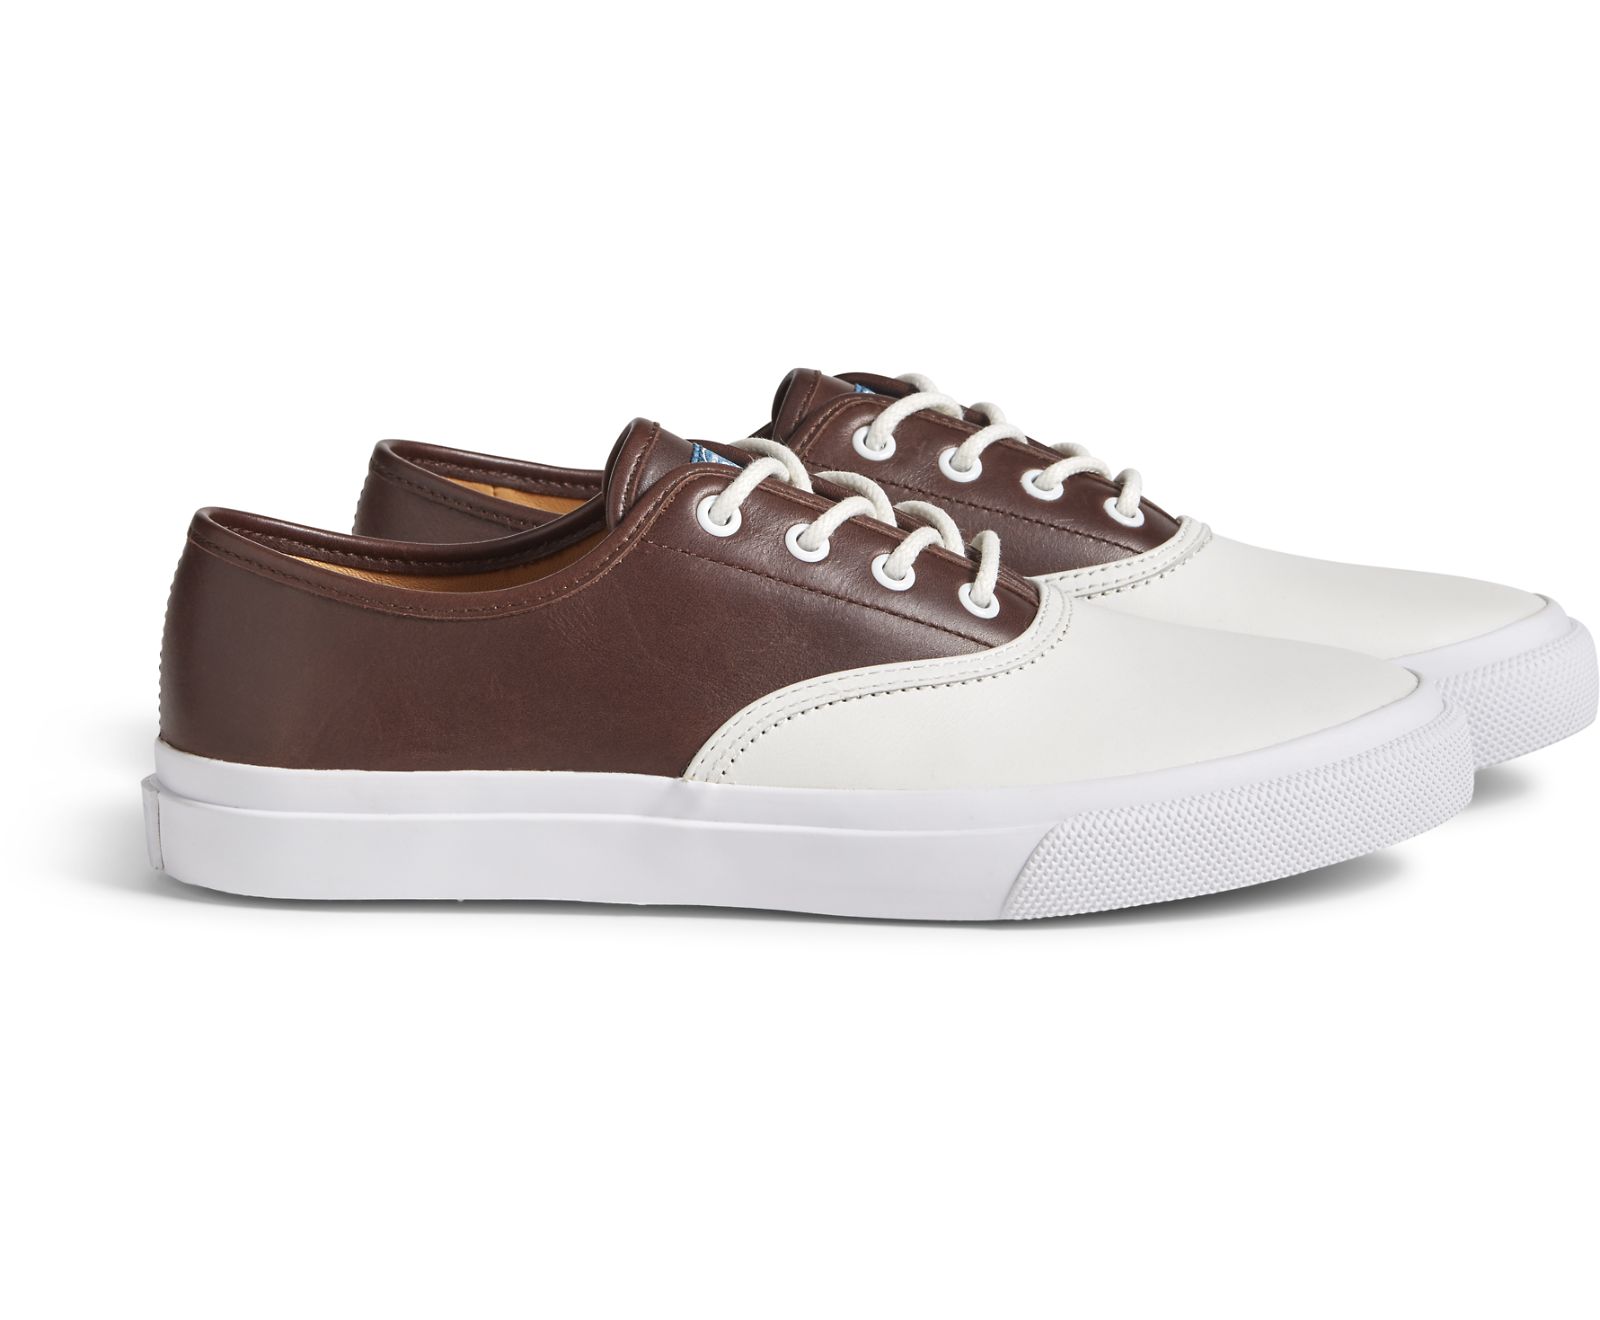 Unisex Unisex Cloud CVO Leather Deck Sneaker - Classic Brown/White